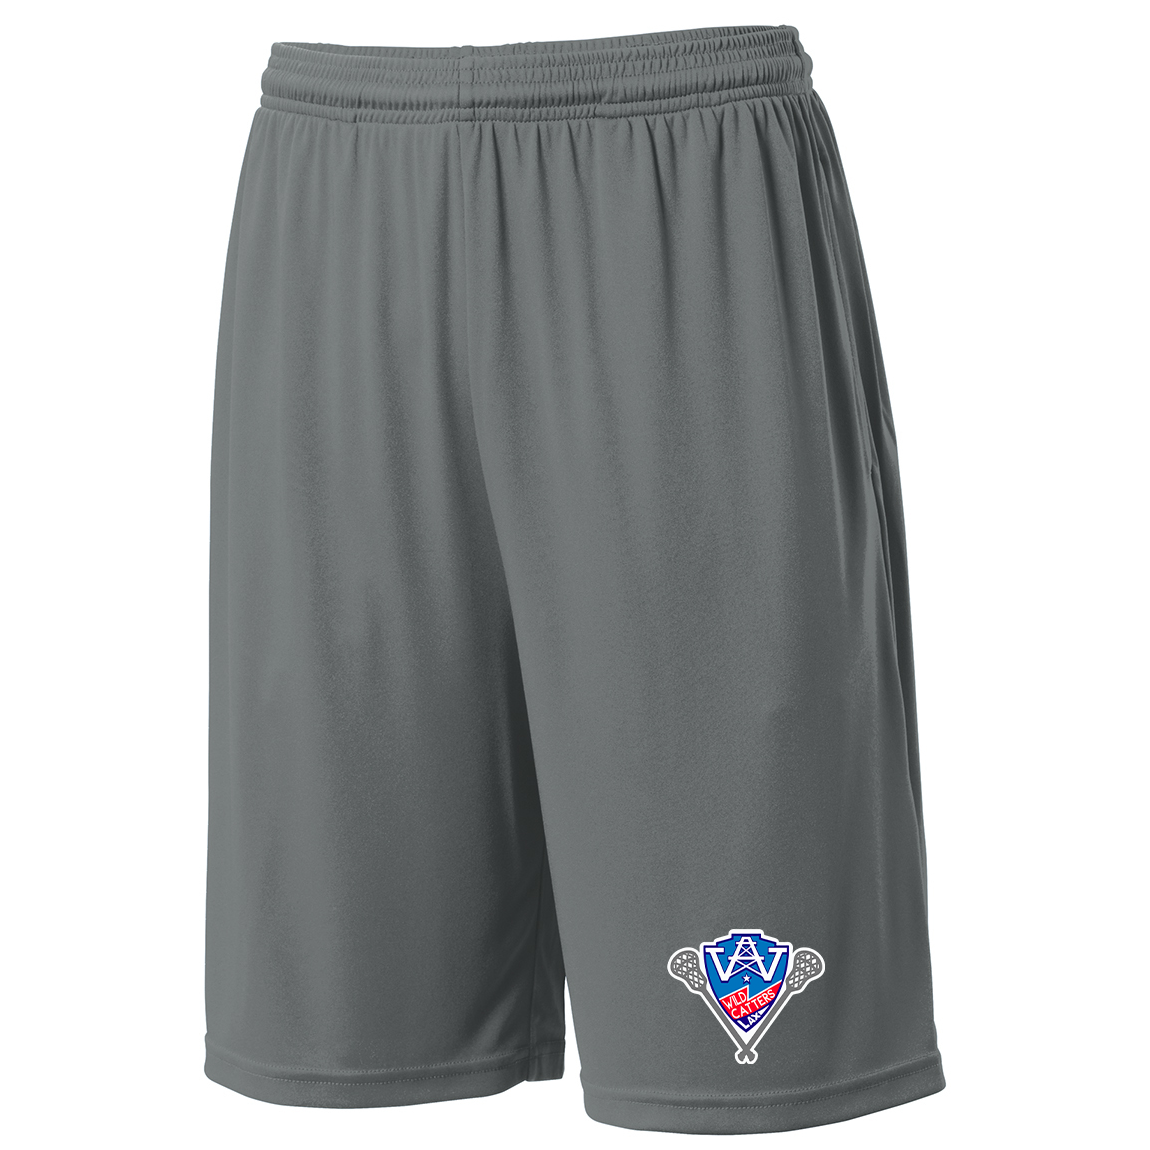 Wildcatters Lax Shorts